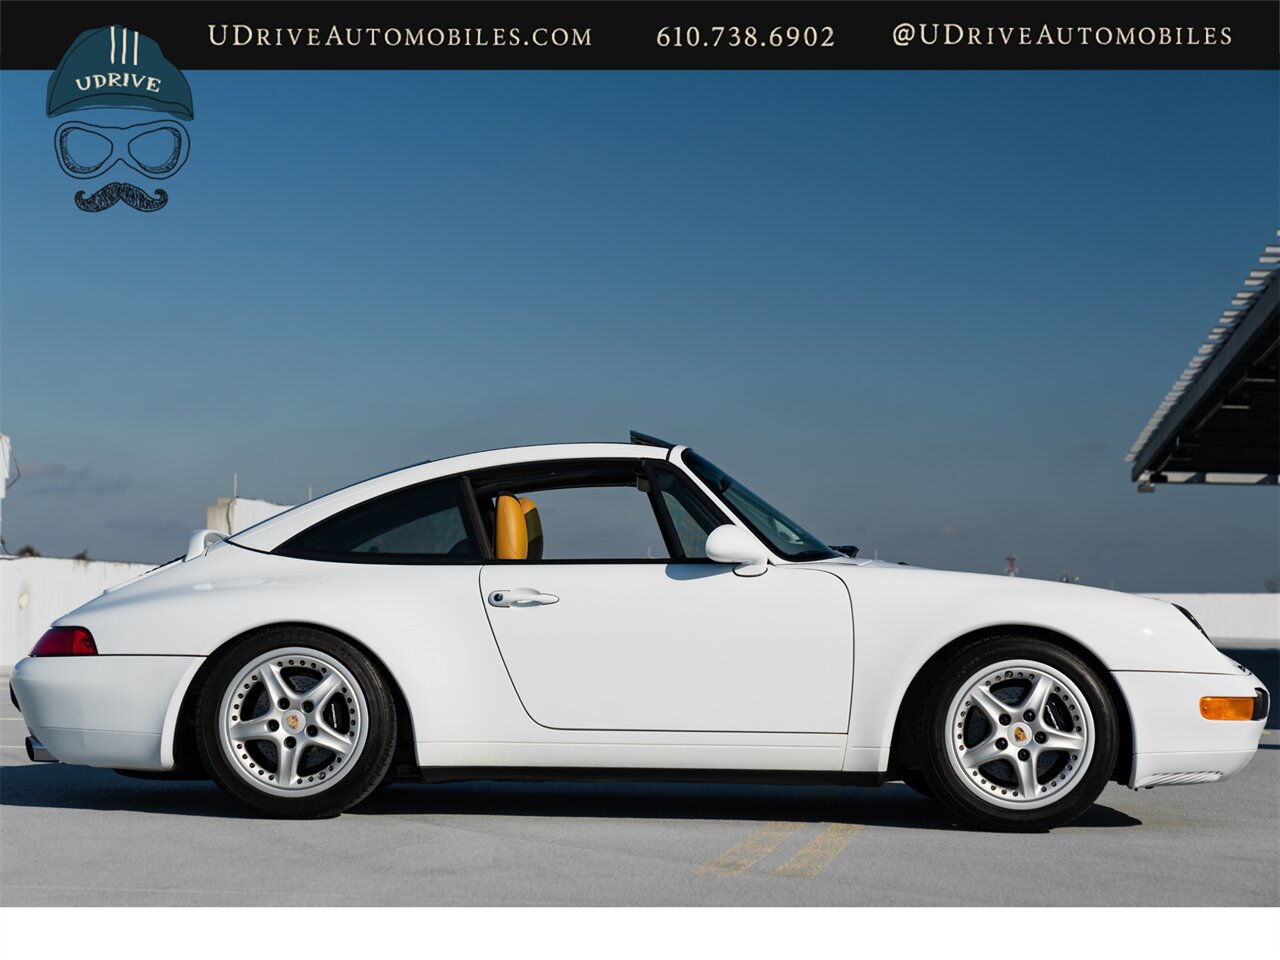 1998 Porsche 911 Carrera 993 Targa  1 of 122 Produced 6 Speed $10k Recent Service Engine Reseal - Photo 17 - West Chester, PA 19382